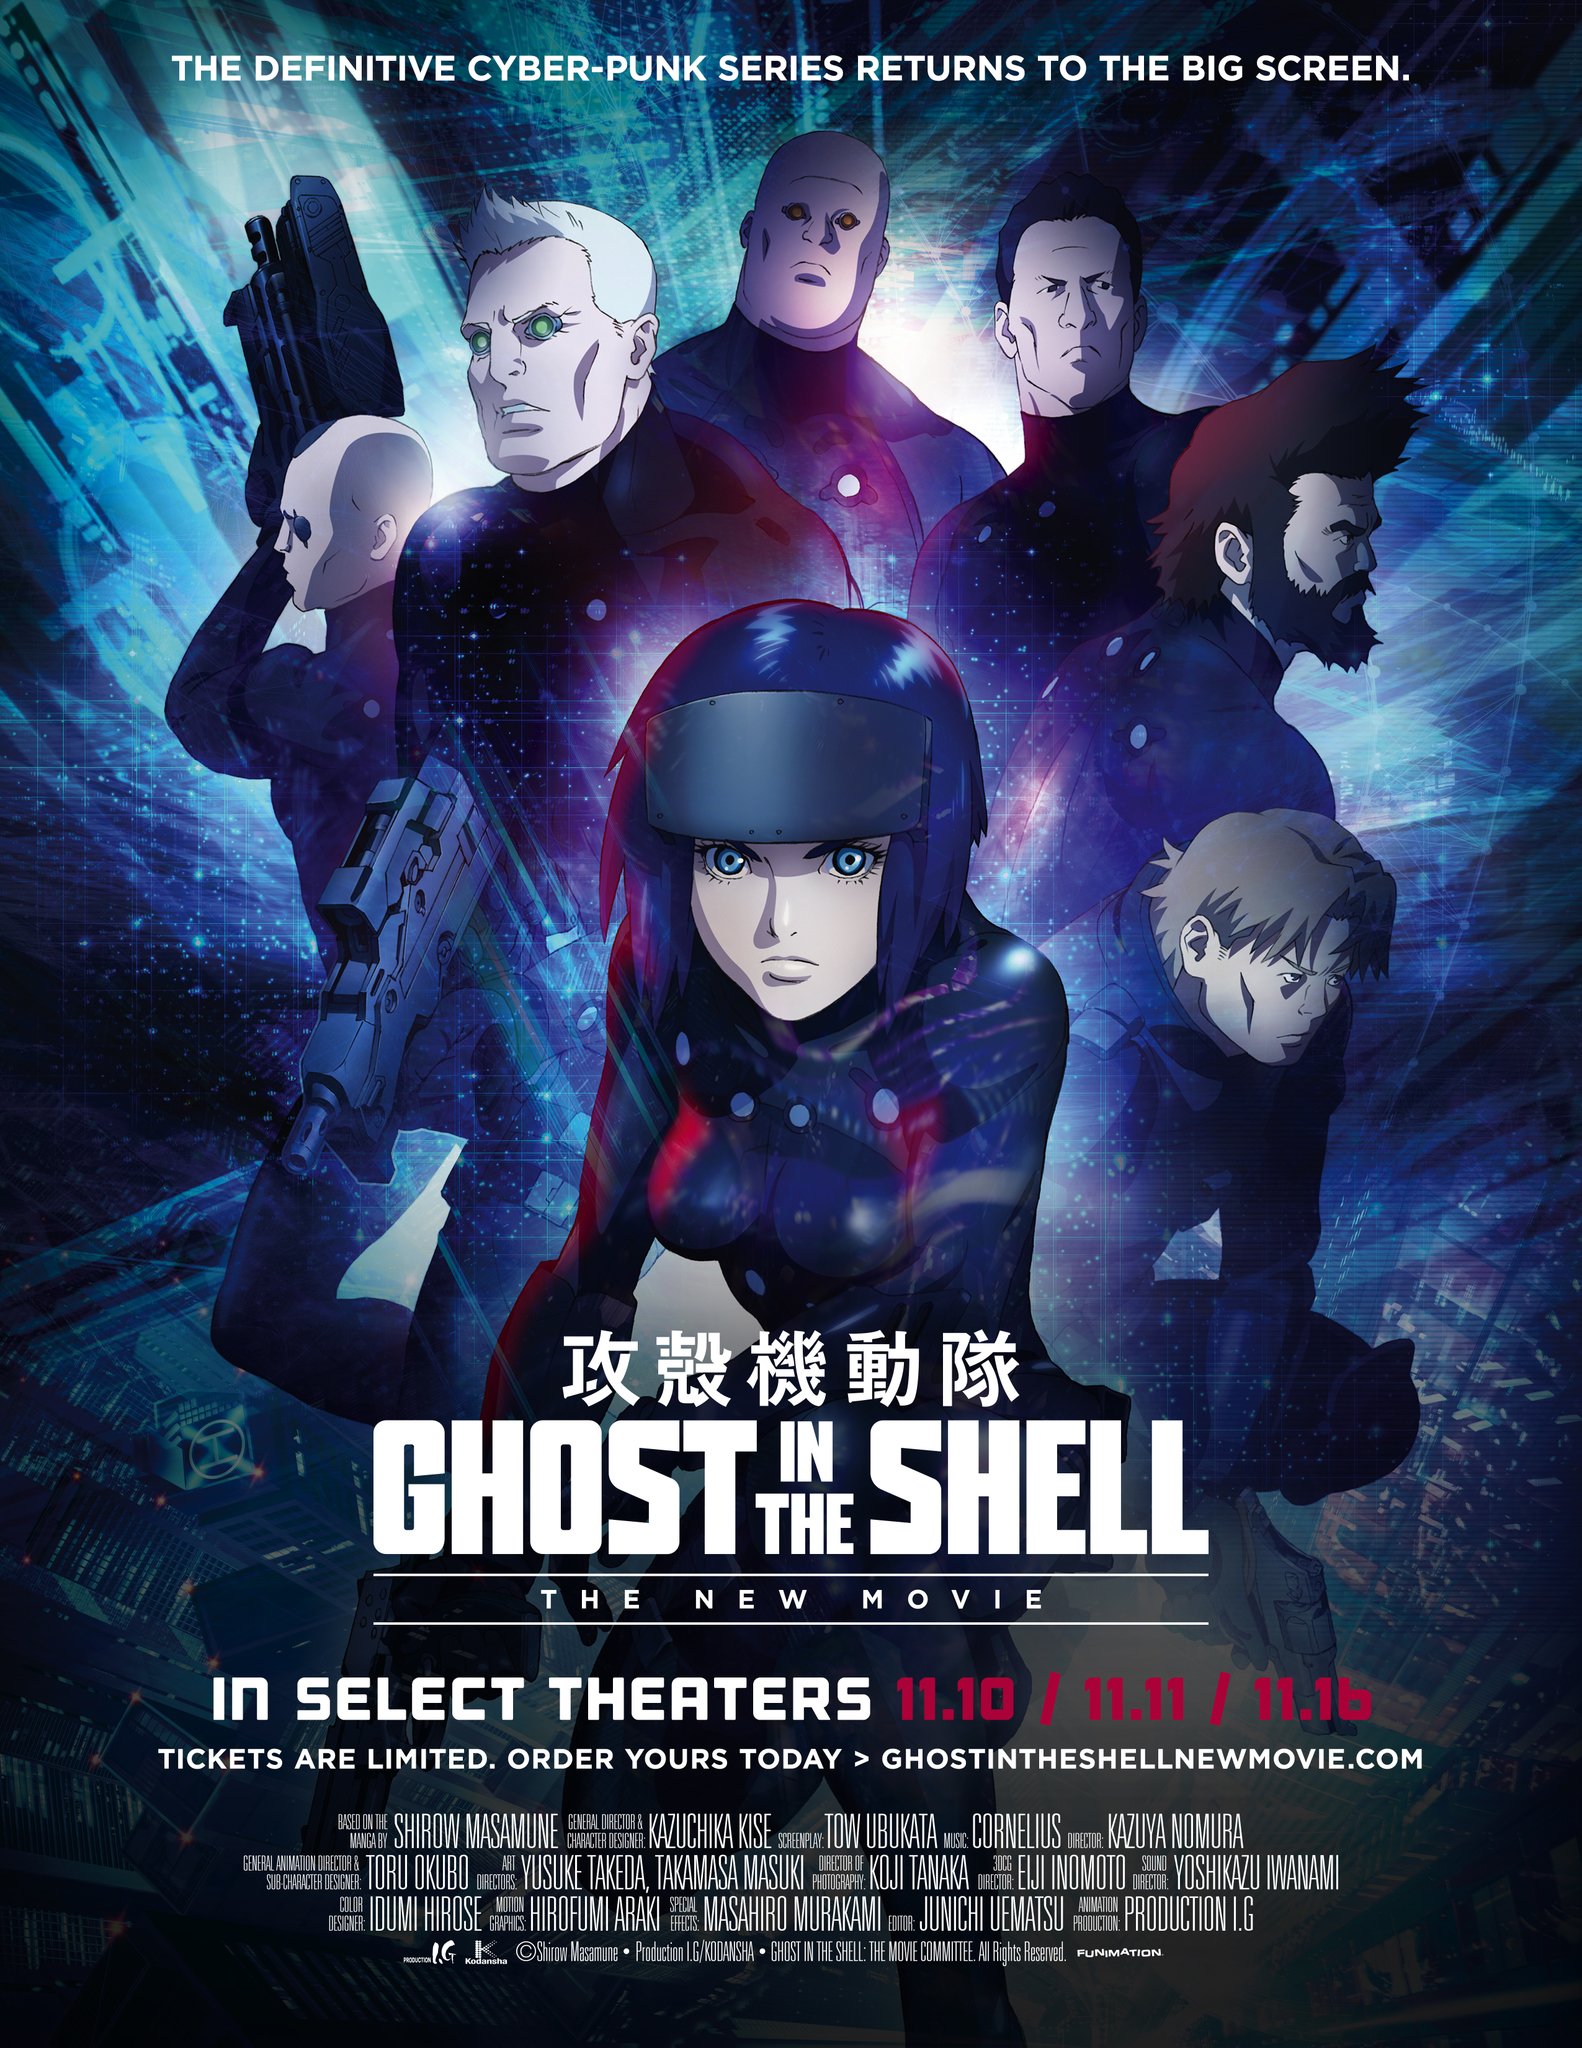 Ghost In The Shell The New Movie.jpg